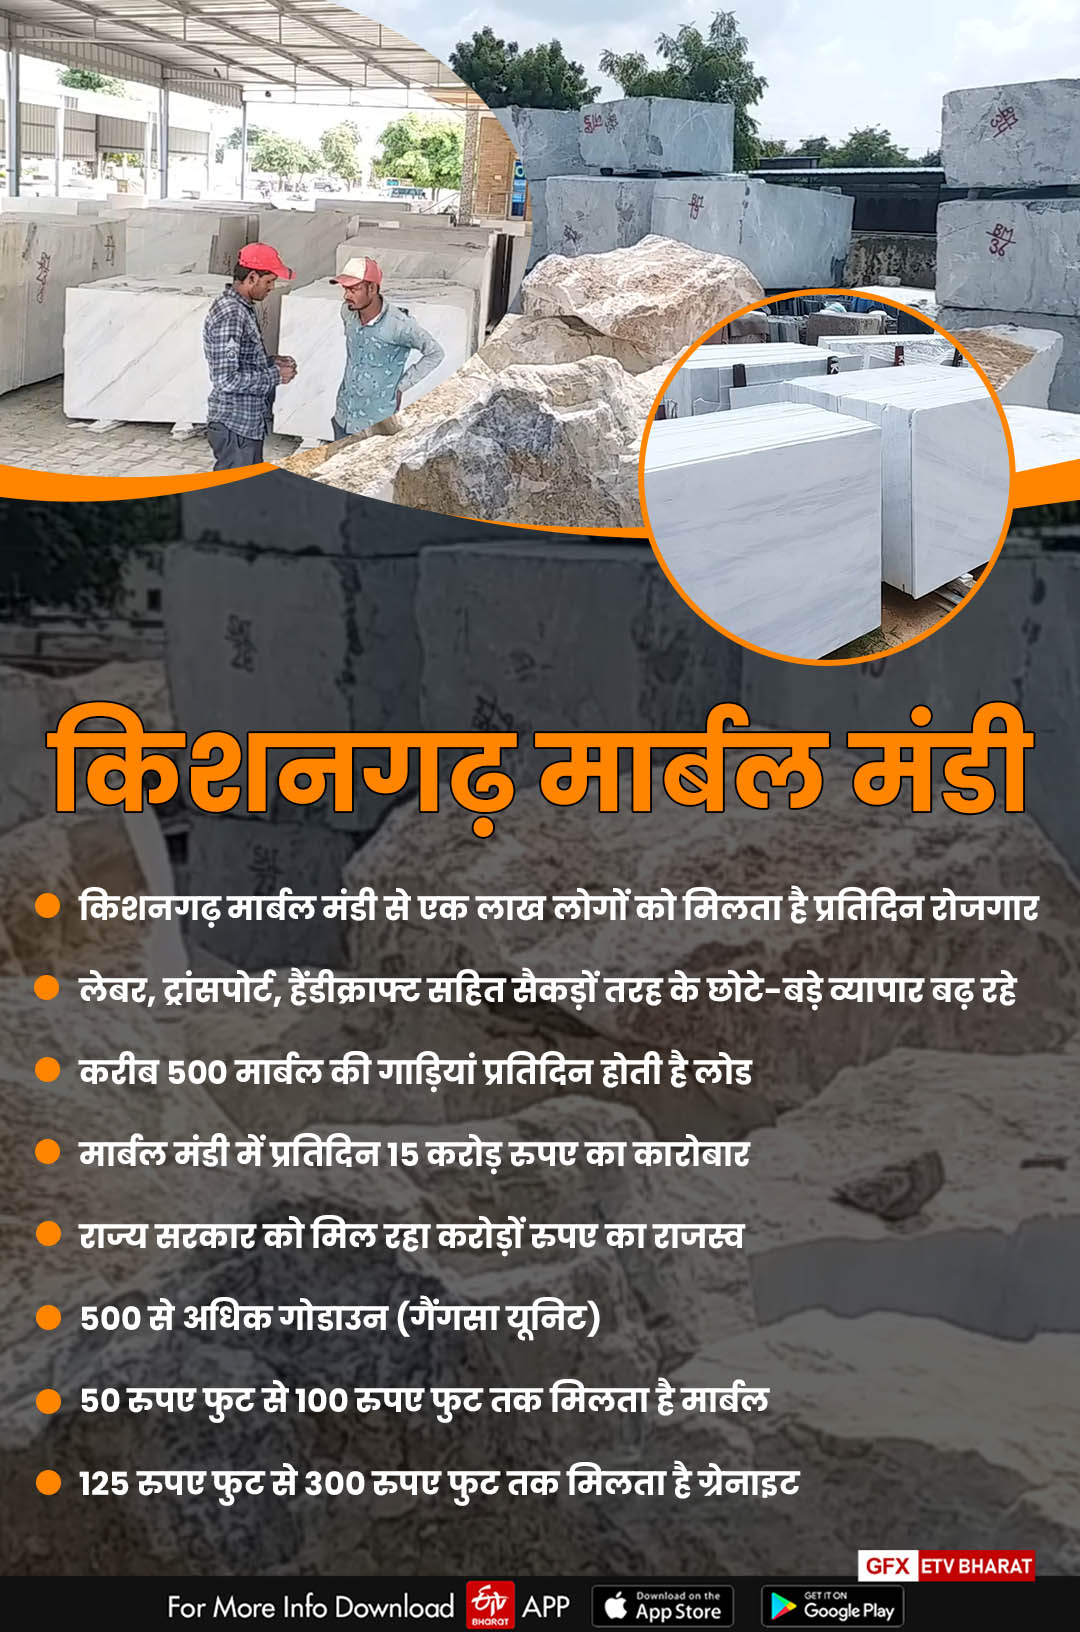 Marble is lifeline for Ajmer, business of marble in AJmer